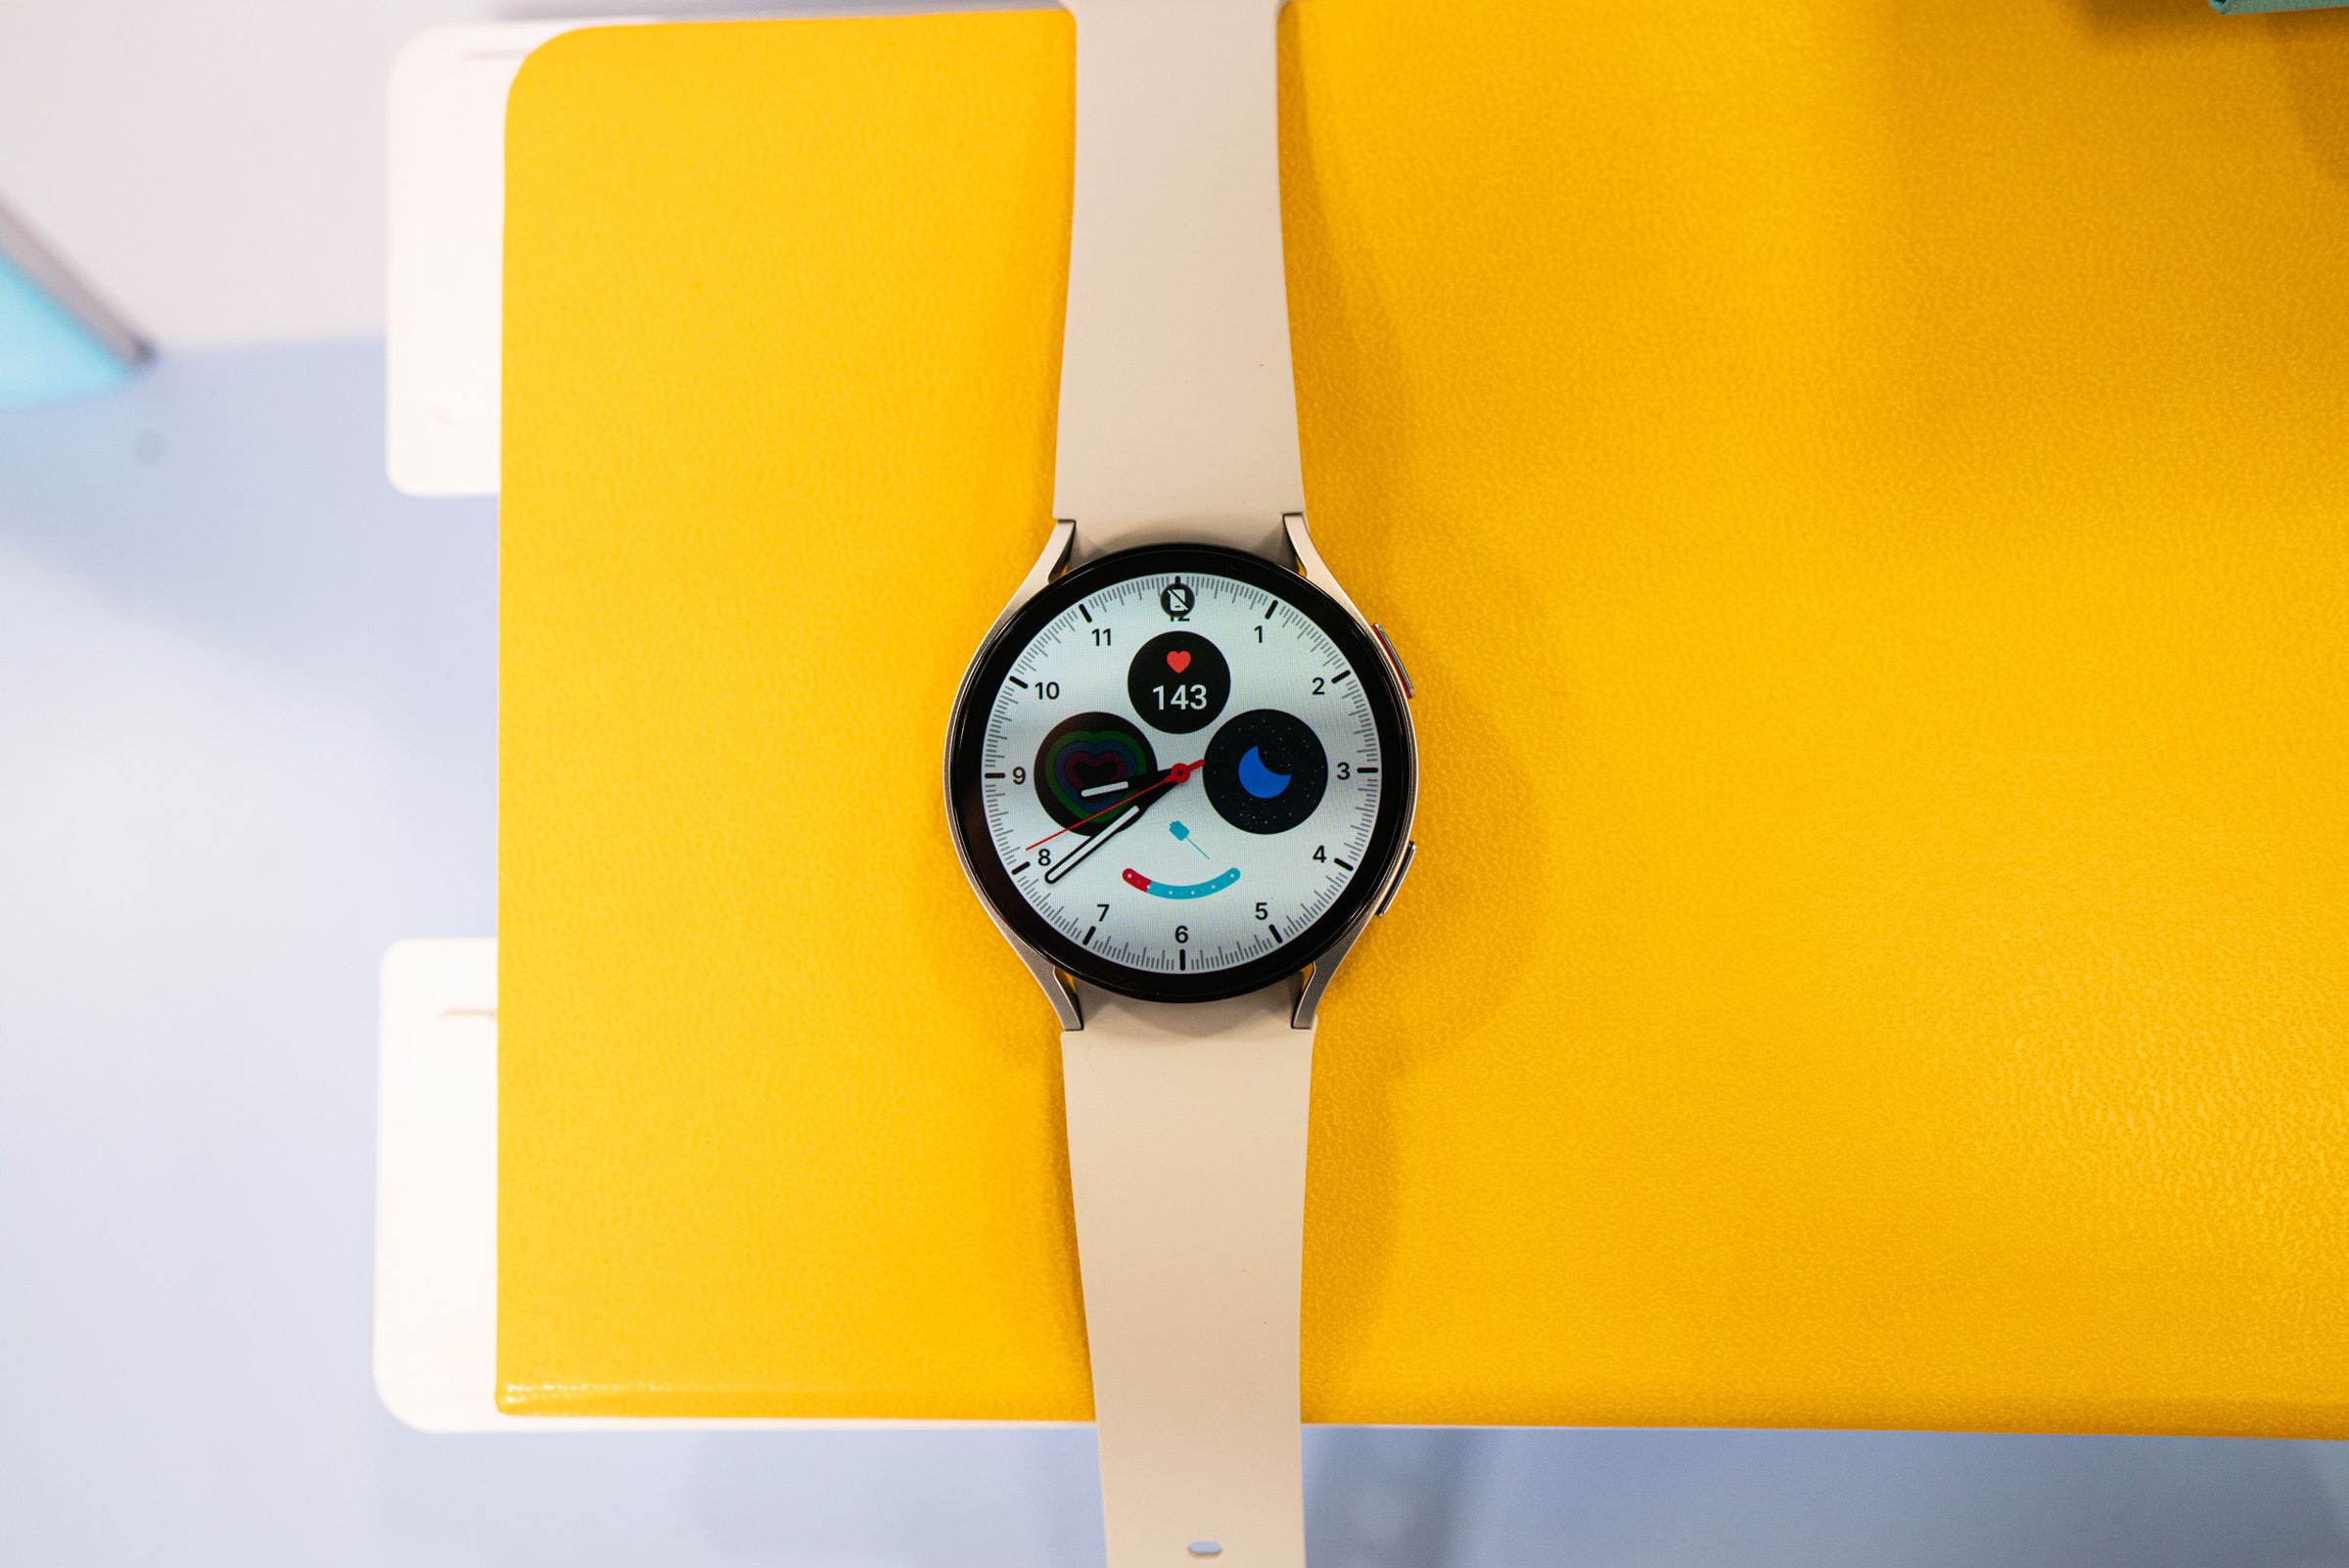 The Galaxy Watch 6 in the 44mm size on a yellow surface